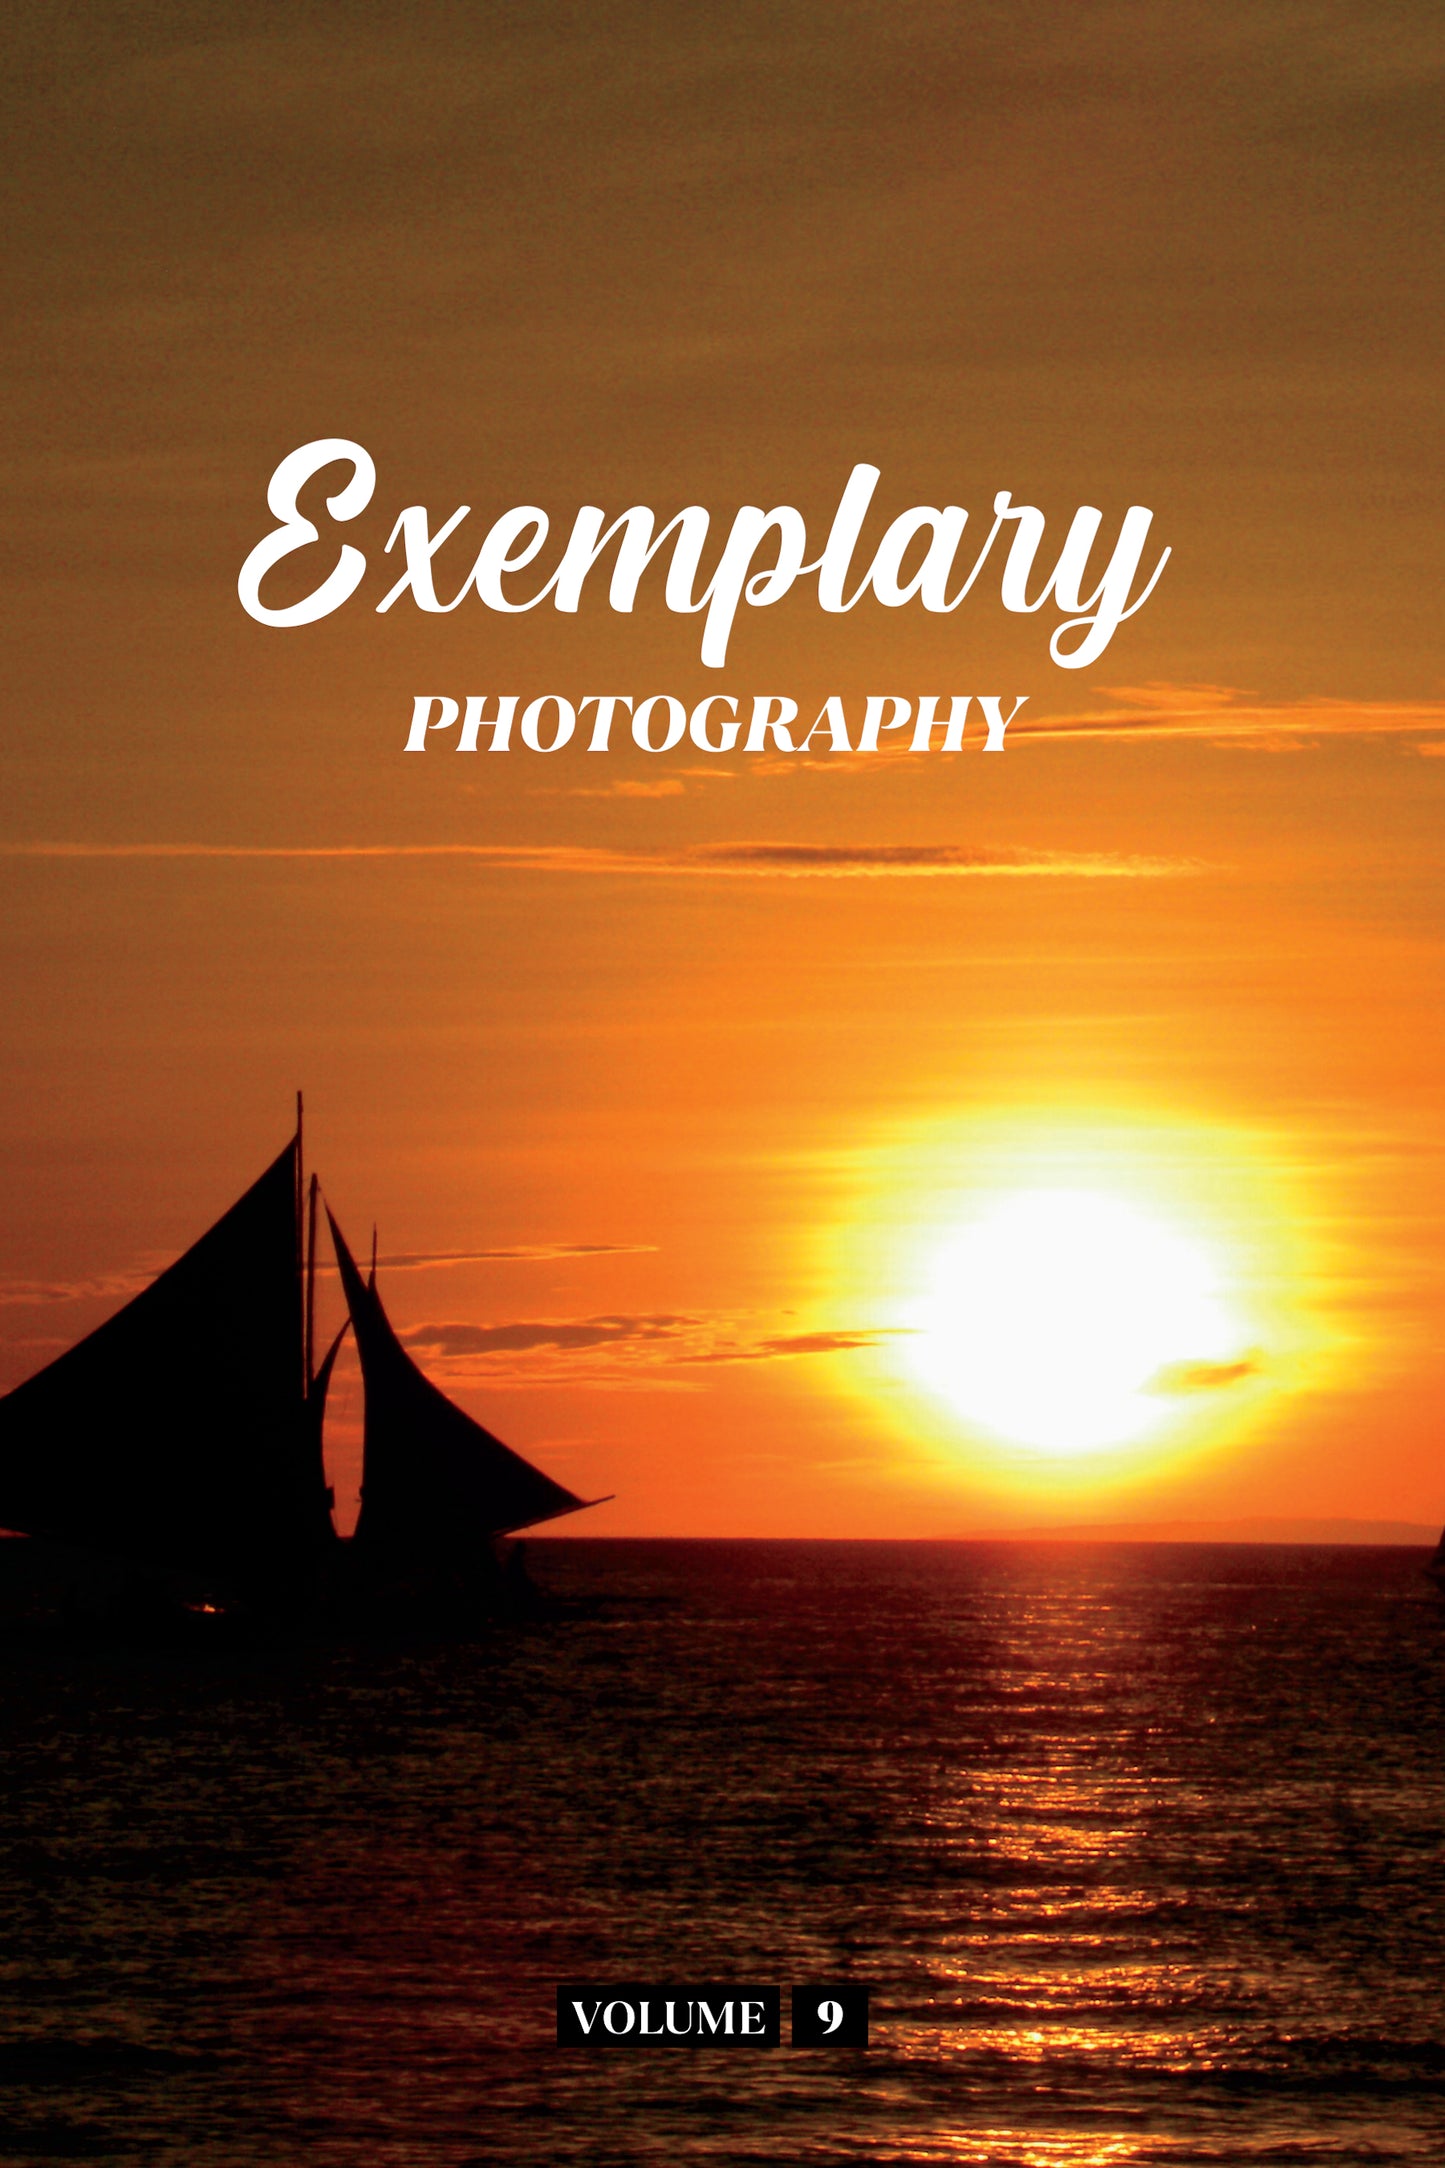 Exemplary Photography Volume 9 (Physical Book)